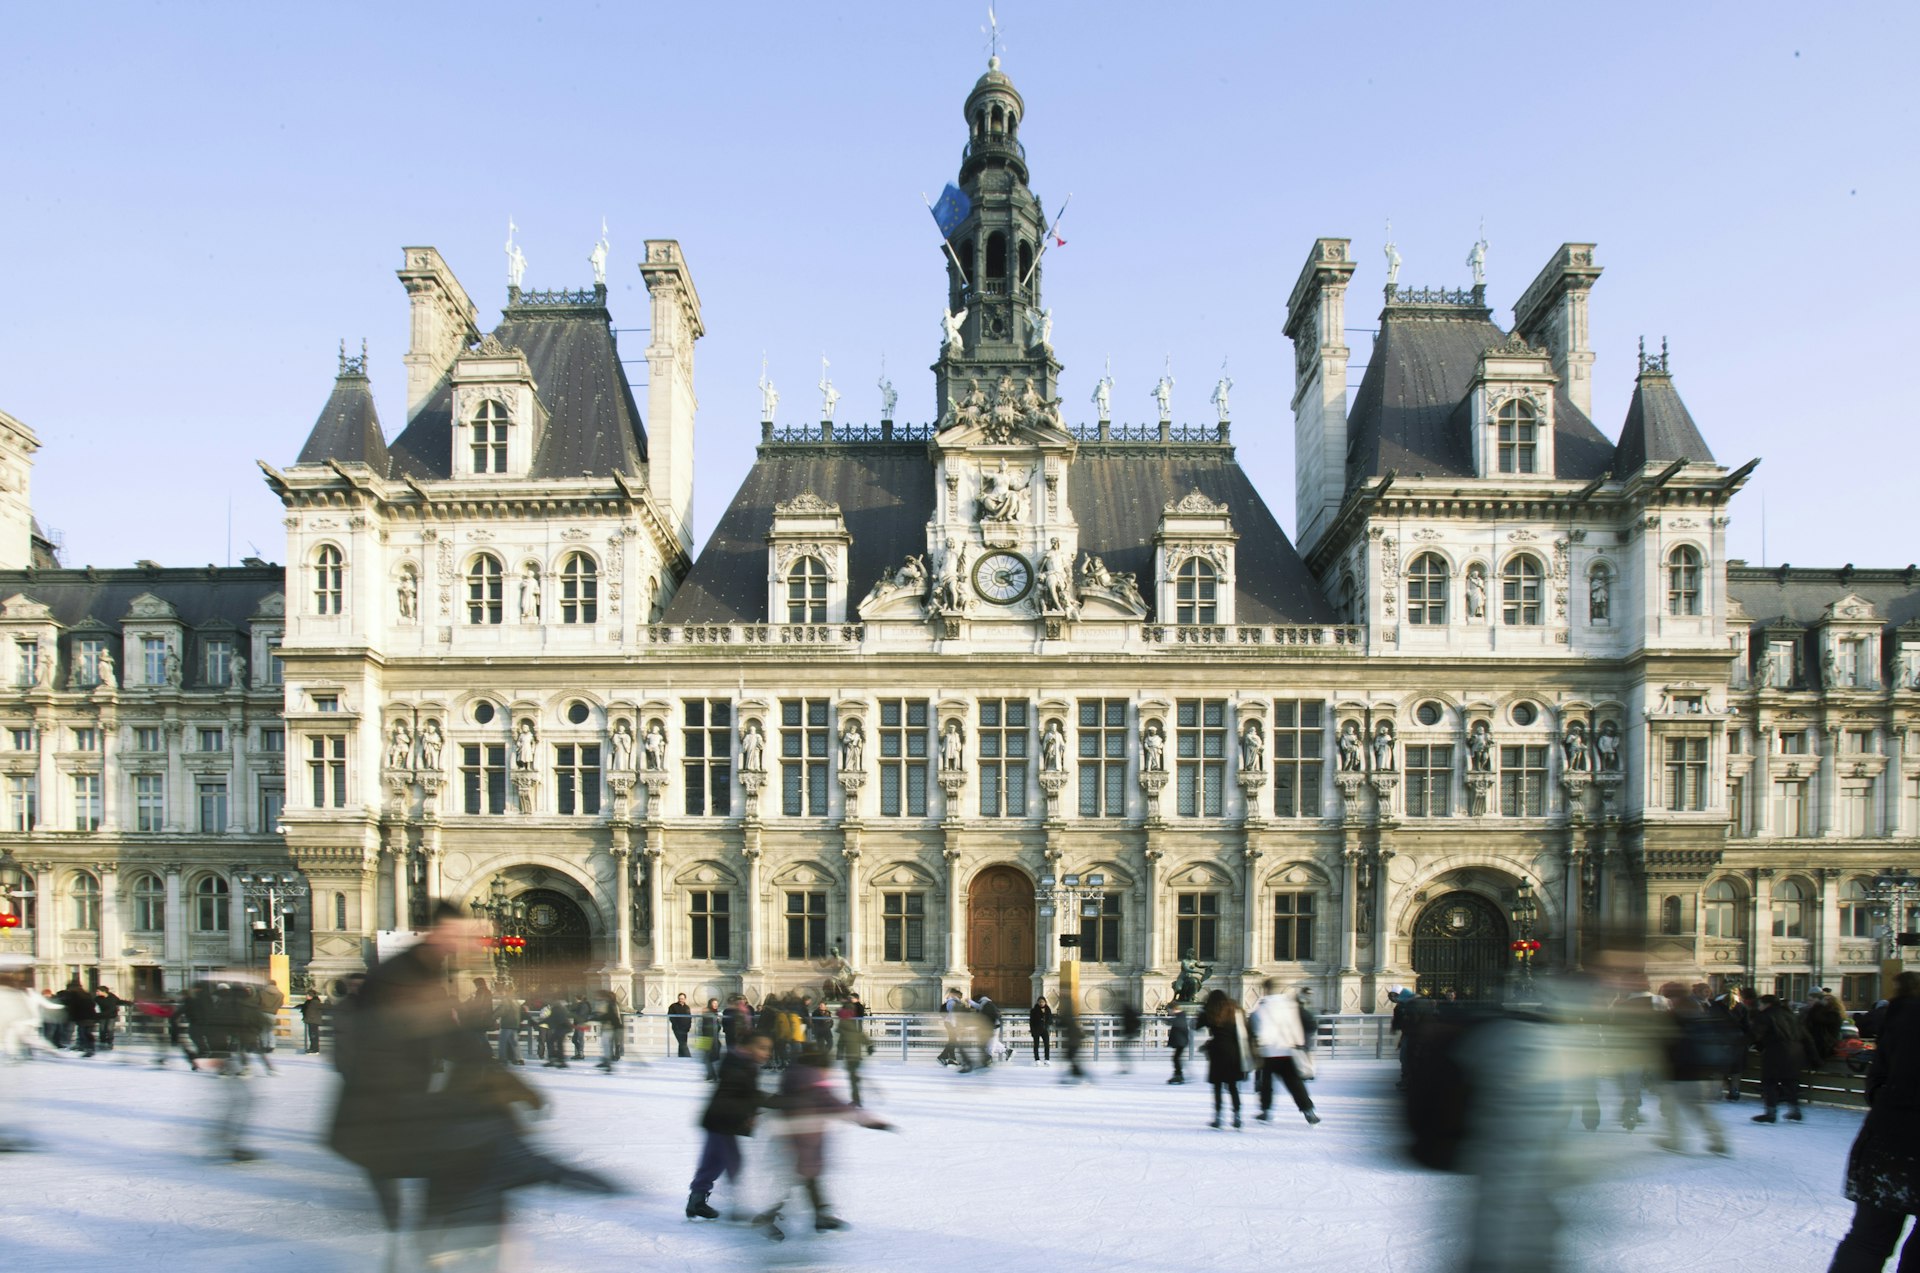 Ice skaters use a rink in front of Hotel de Ville in Paris